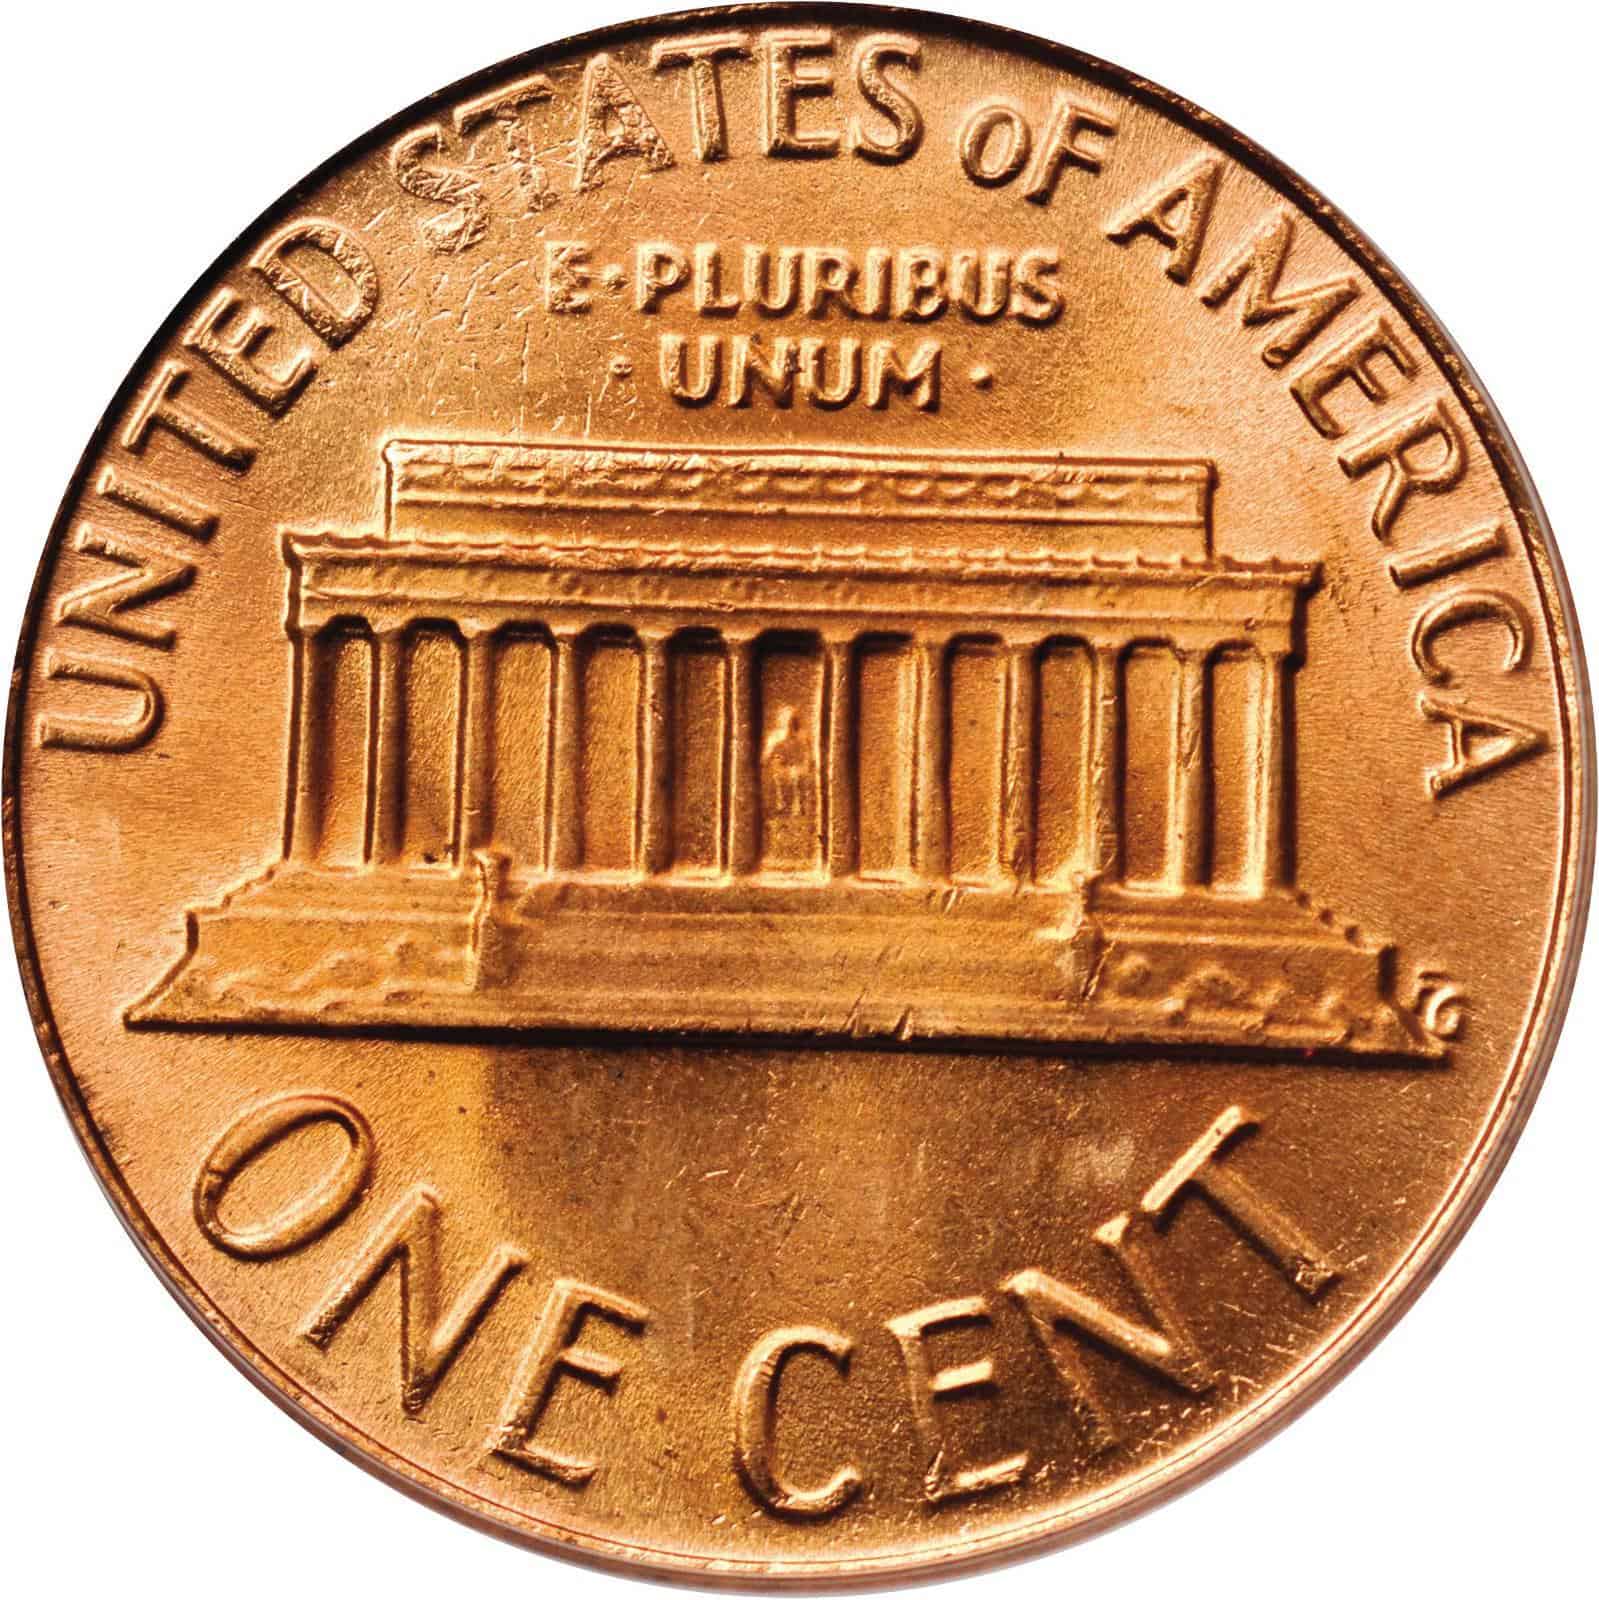 The 1978 Lincoln Memorial penny reverse